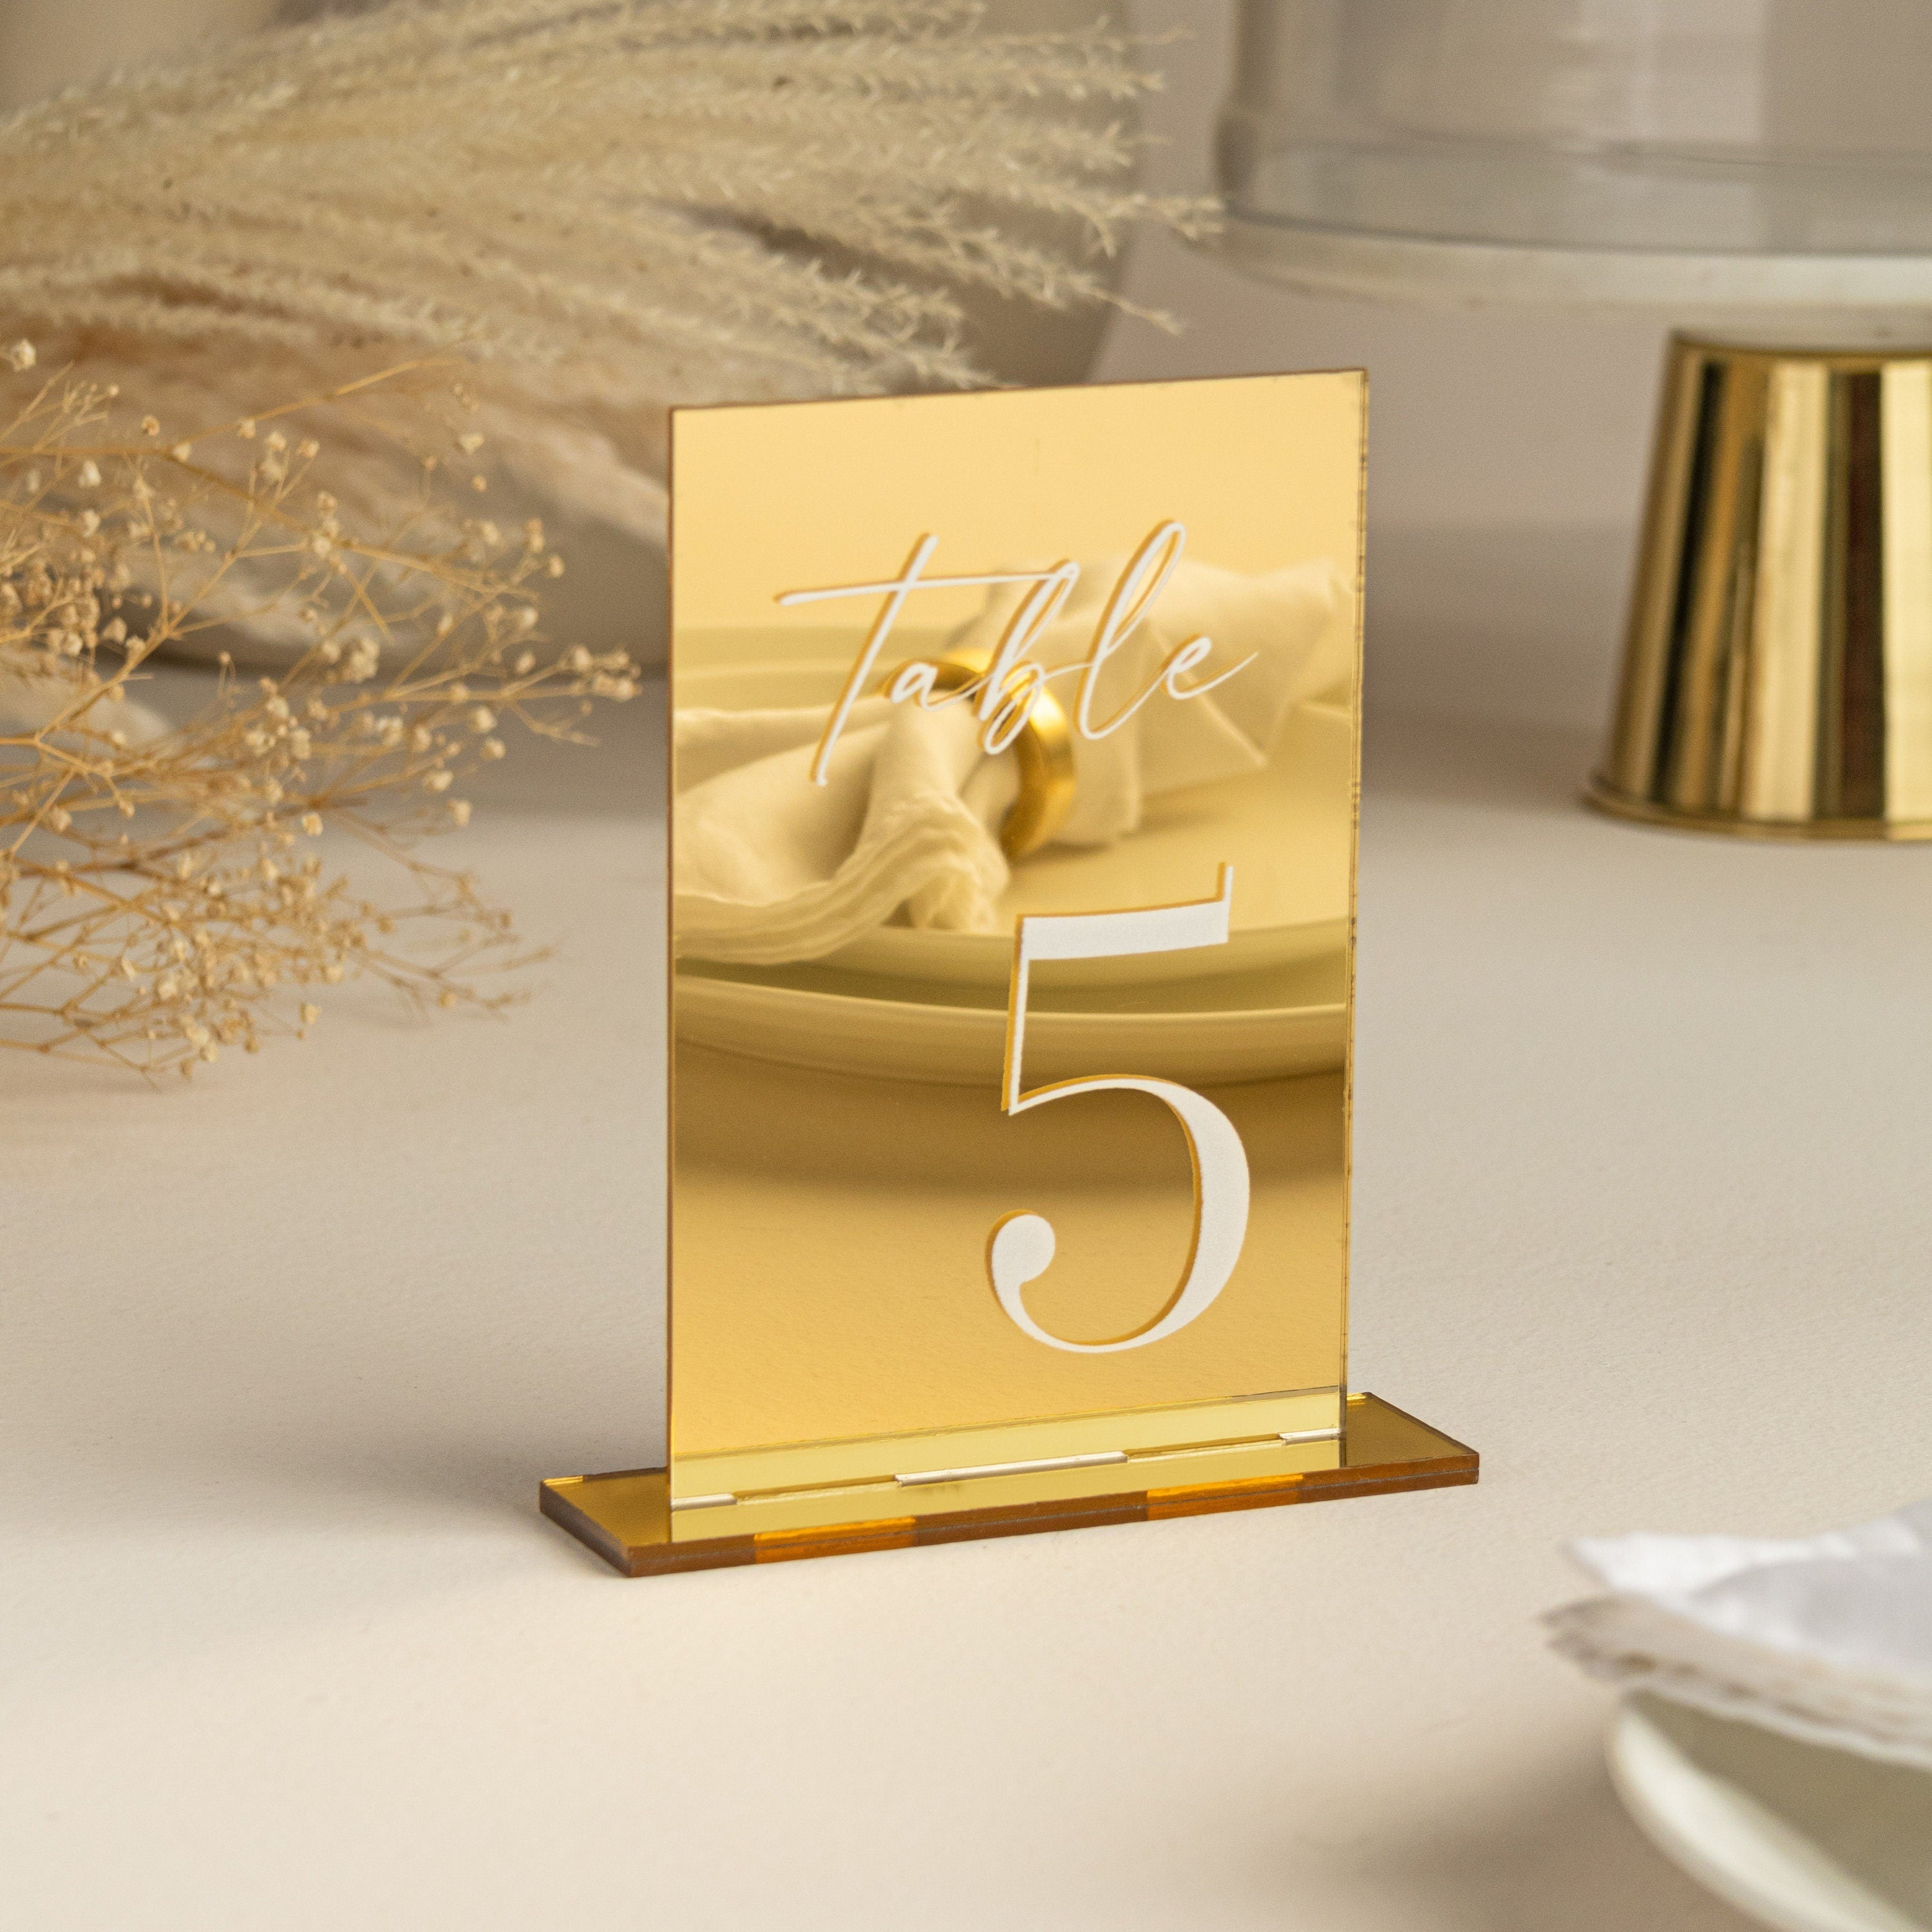 Mirror Gold Acrylic Table Numbers | Wedding Table Numbers | Acrylic Table Numbers | Table Numbers Wedding Decoration | Wedding Table Decor